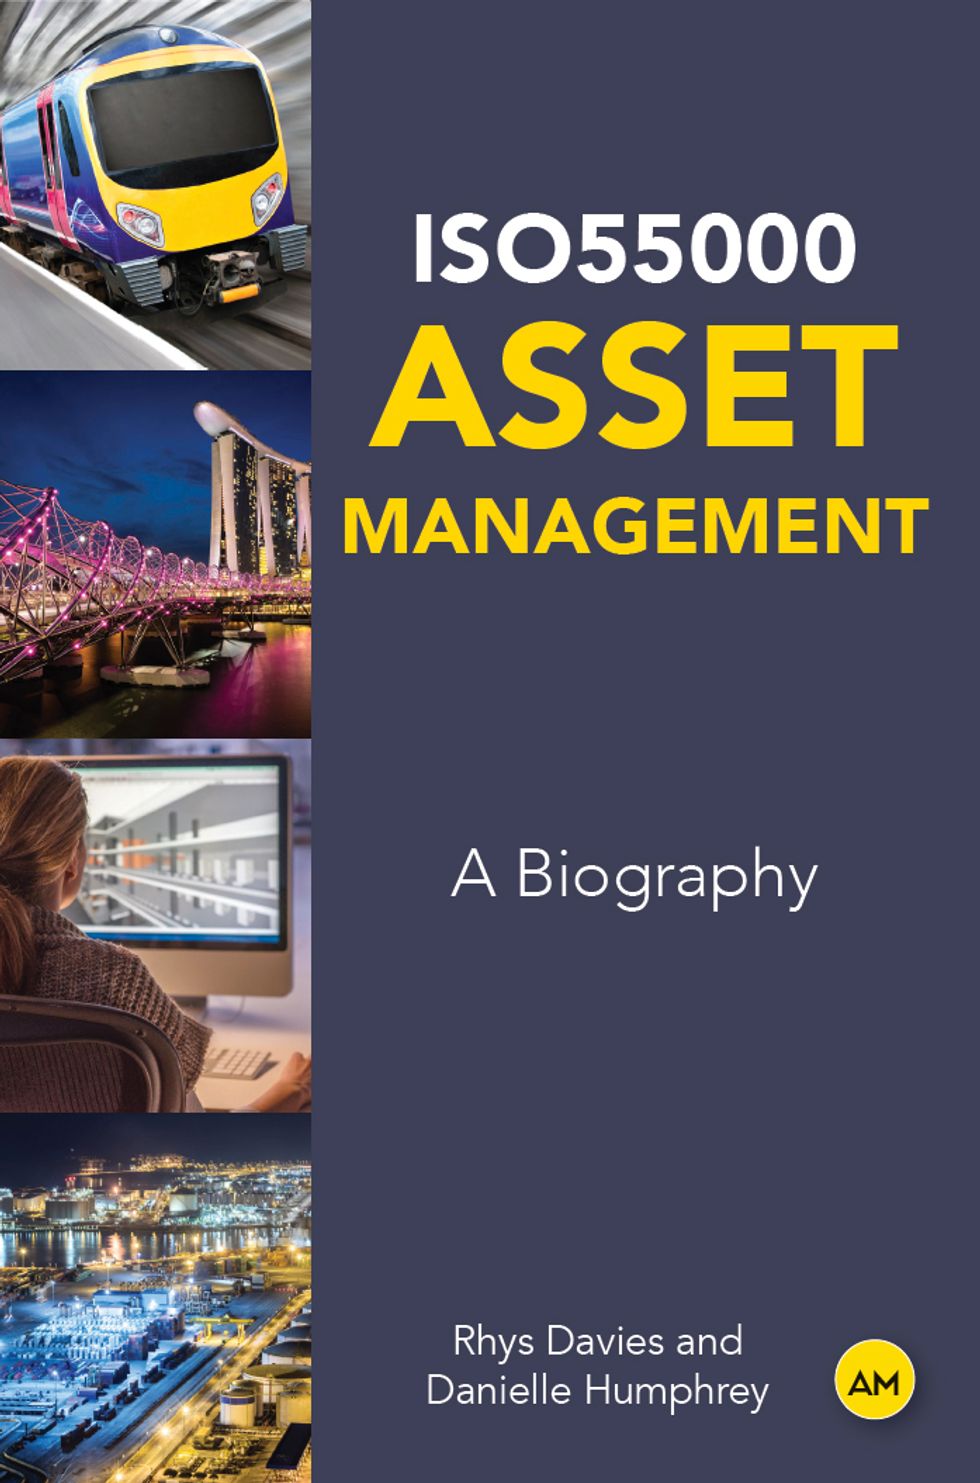  ISO55000 Asset Management – A Biography 